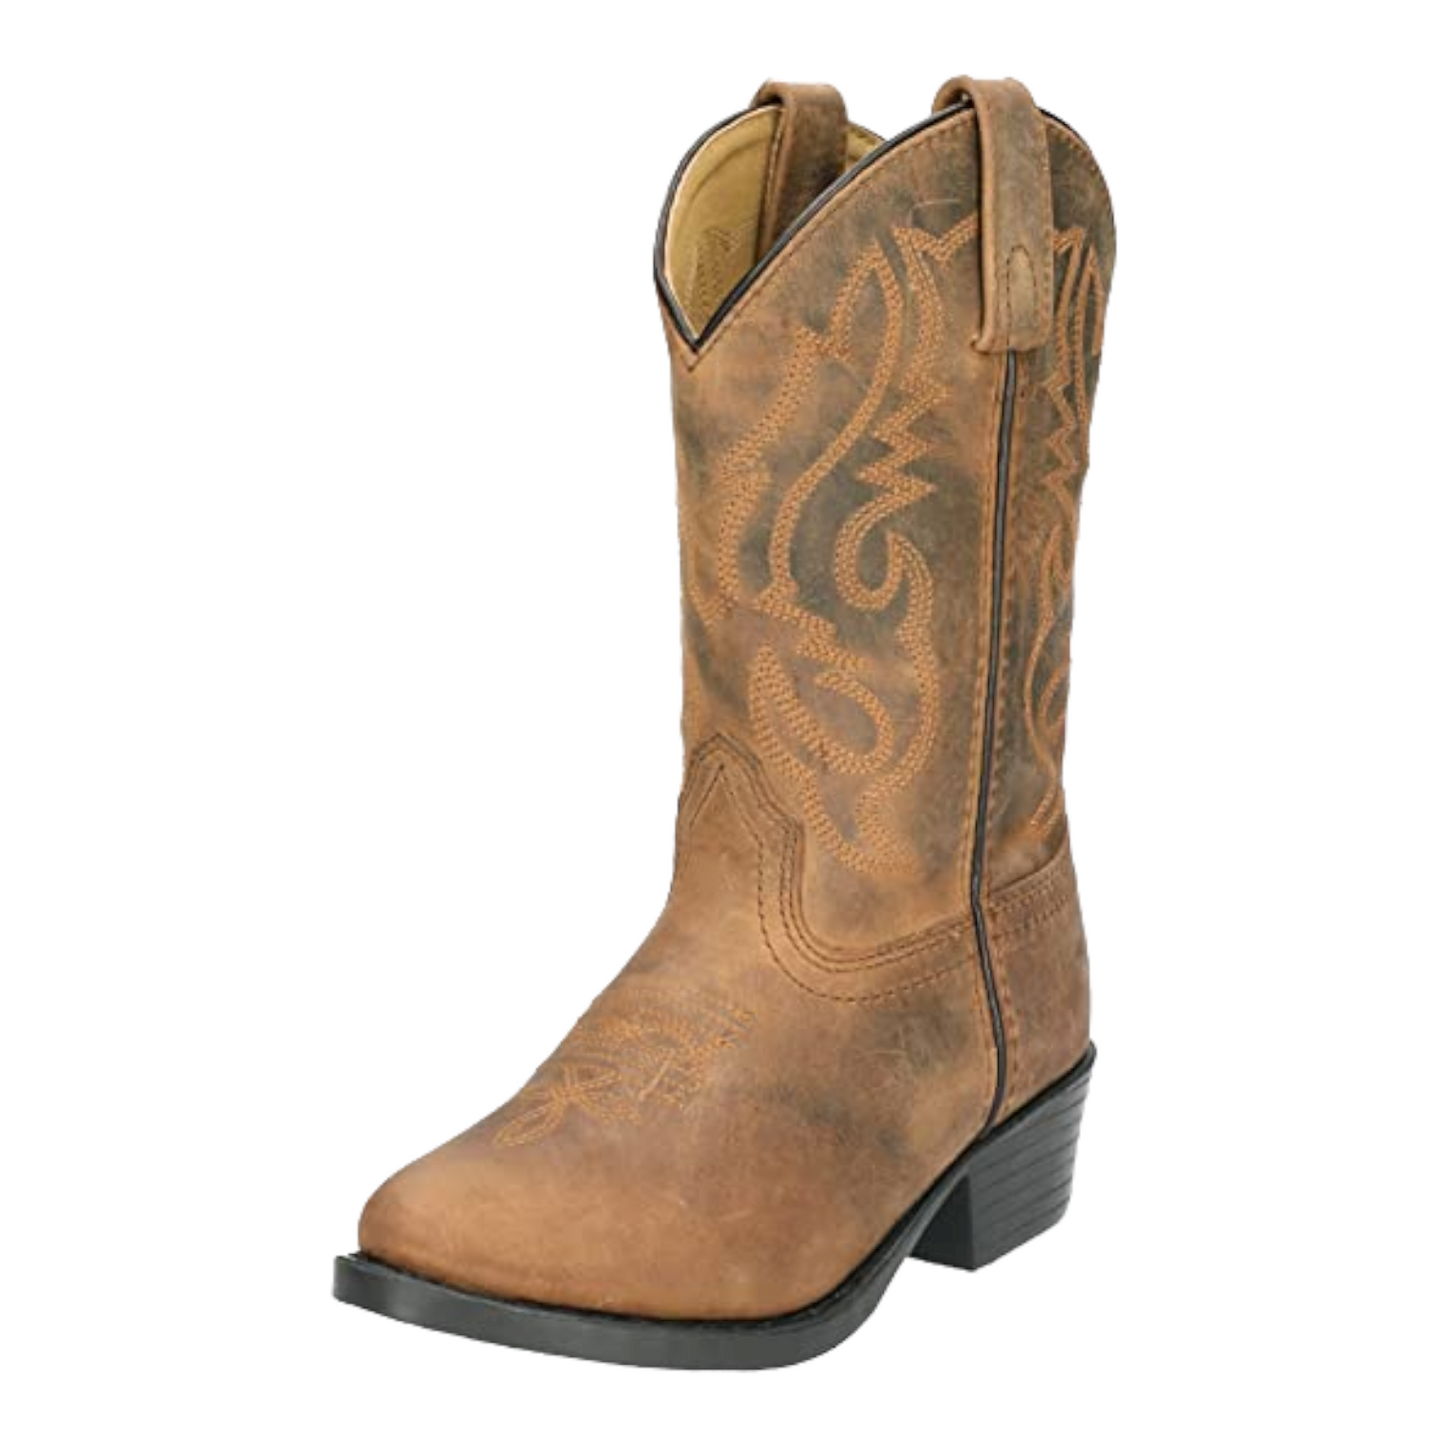 Smoky Mountain Boots Denver Youth Oiled Western Boot